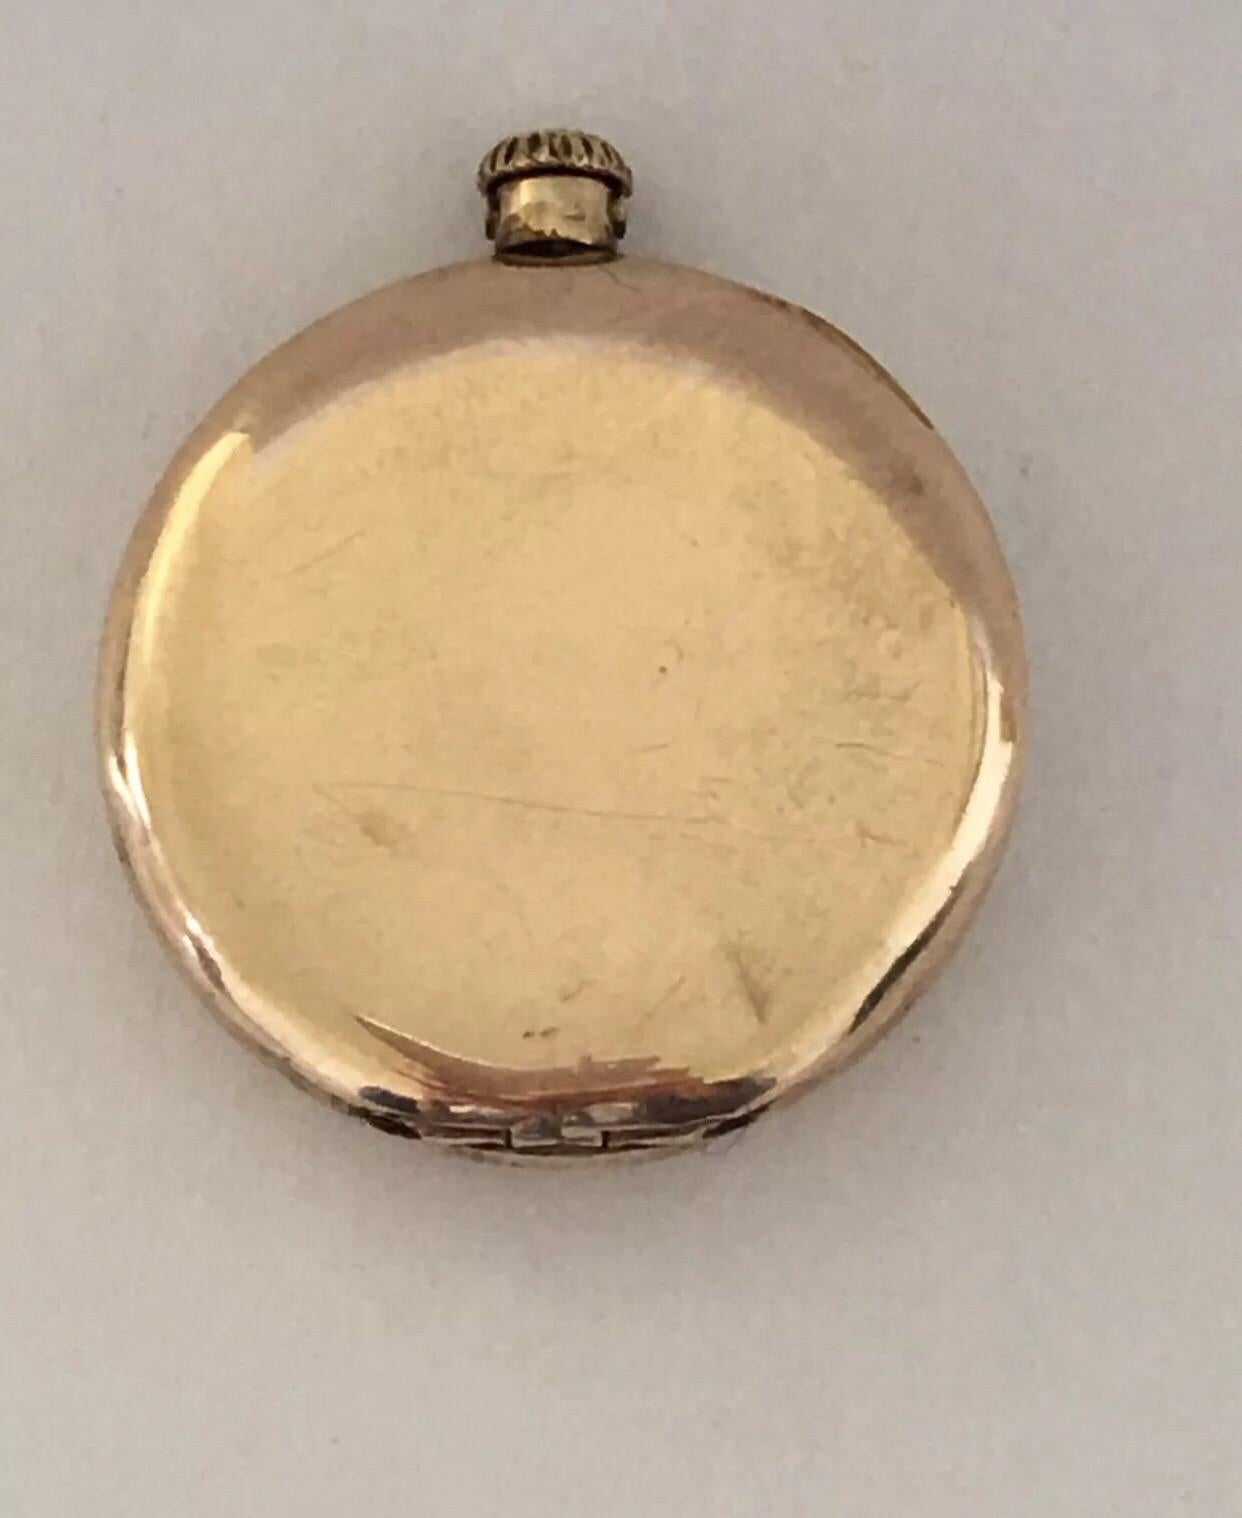 Small Antique Gold Plated Hamilton Pocket / Fob Watch.


This small beautiful watch is working and ticking well. The loop or metal ring is missing